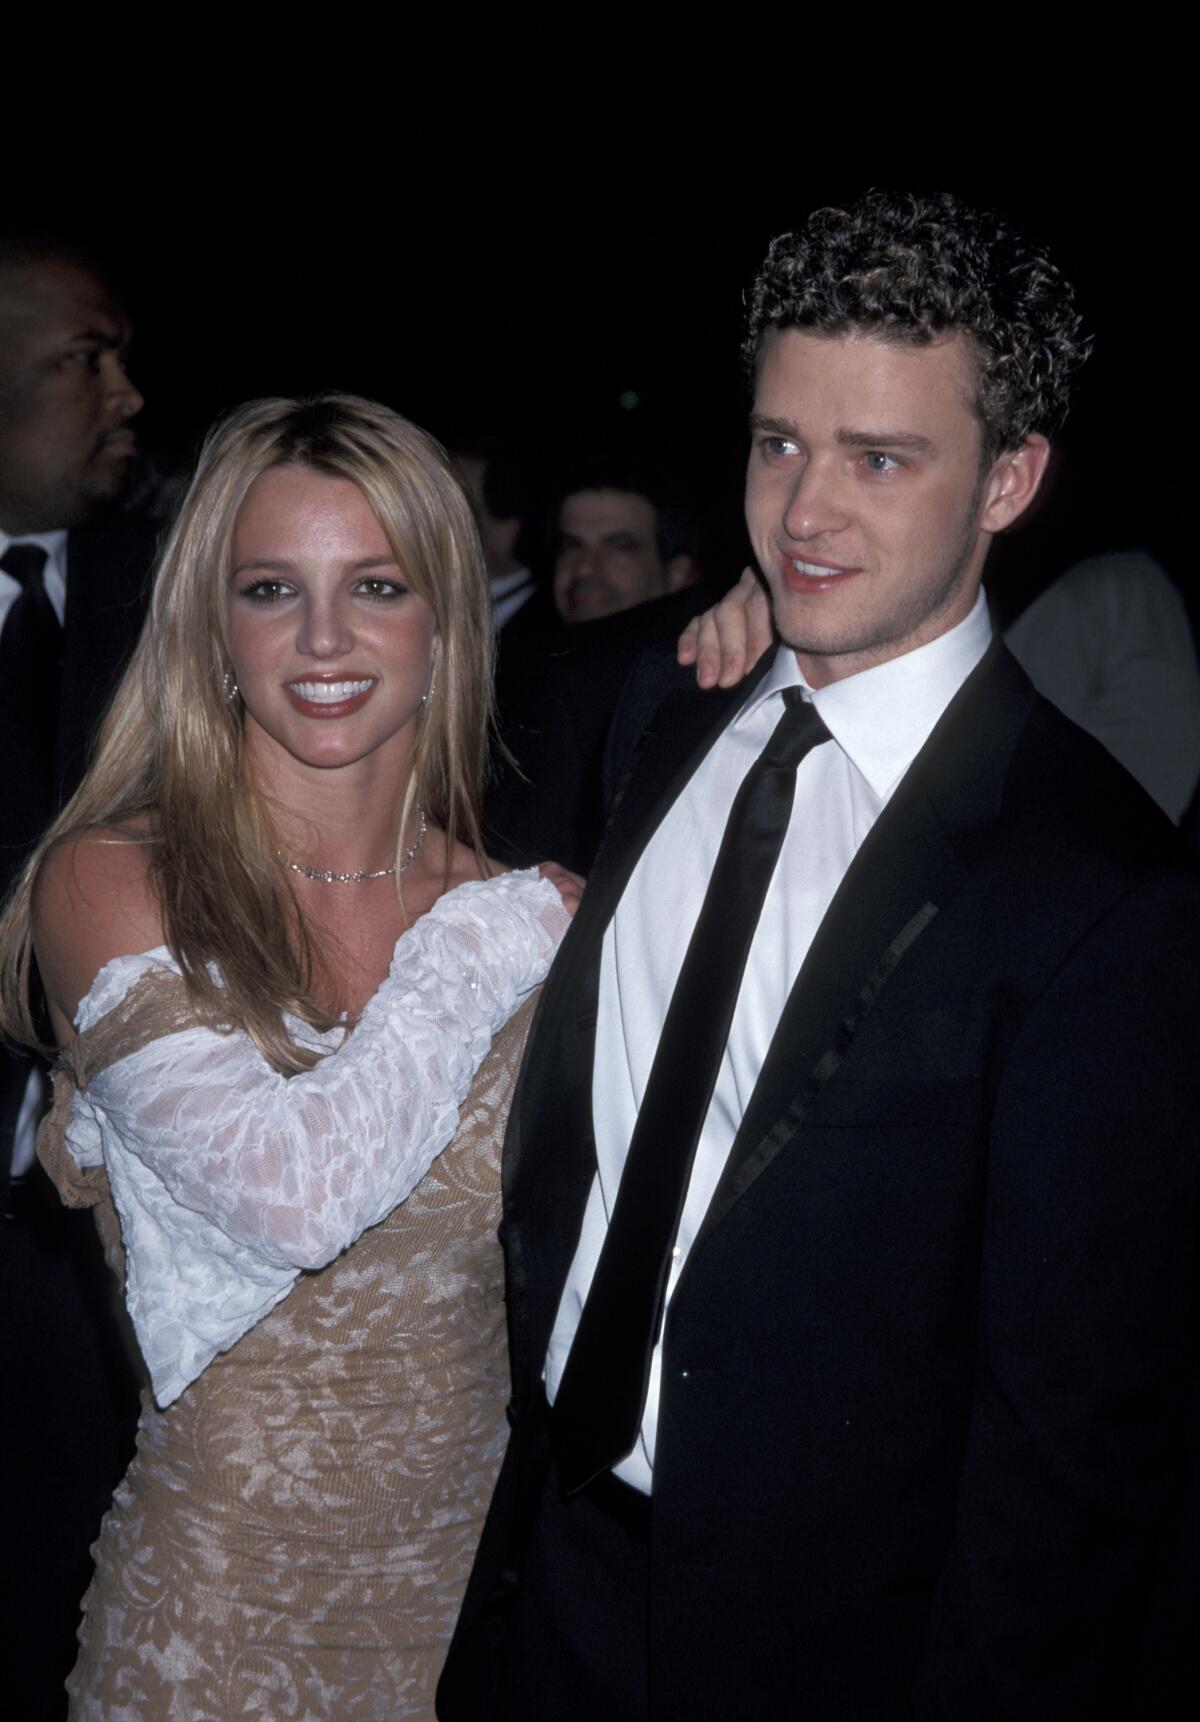 Why Did Britney Spears And Justin Timberlake Break Up In 2002?